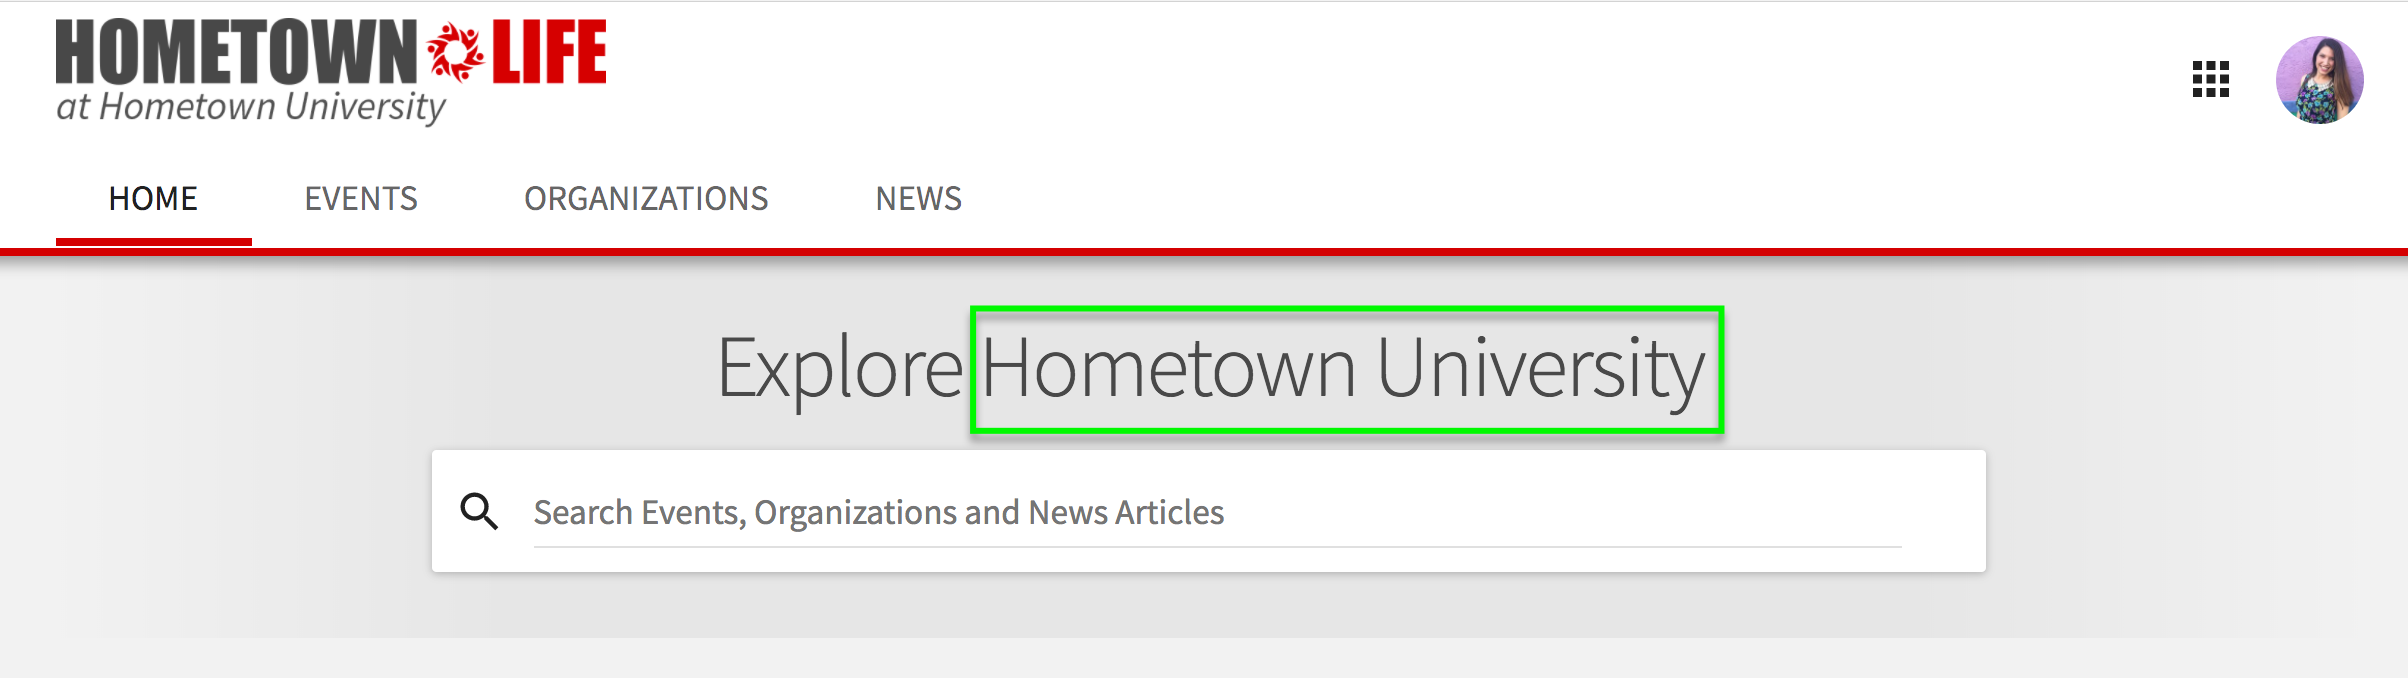 Screenshot highlighting the institution preferred name on the home page search box